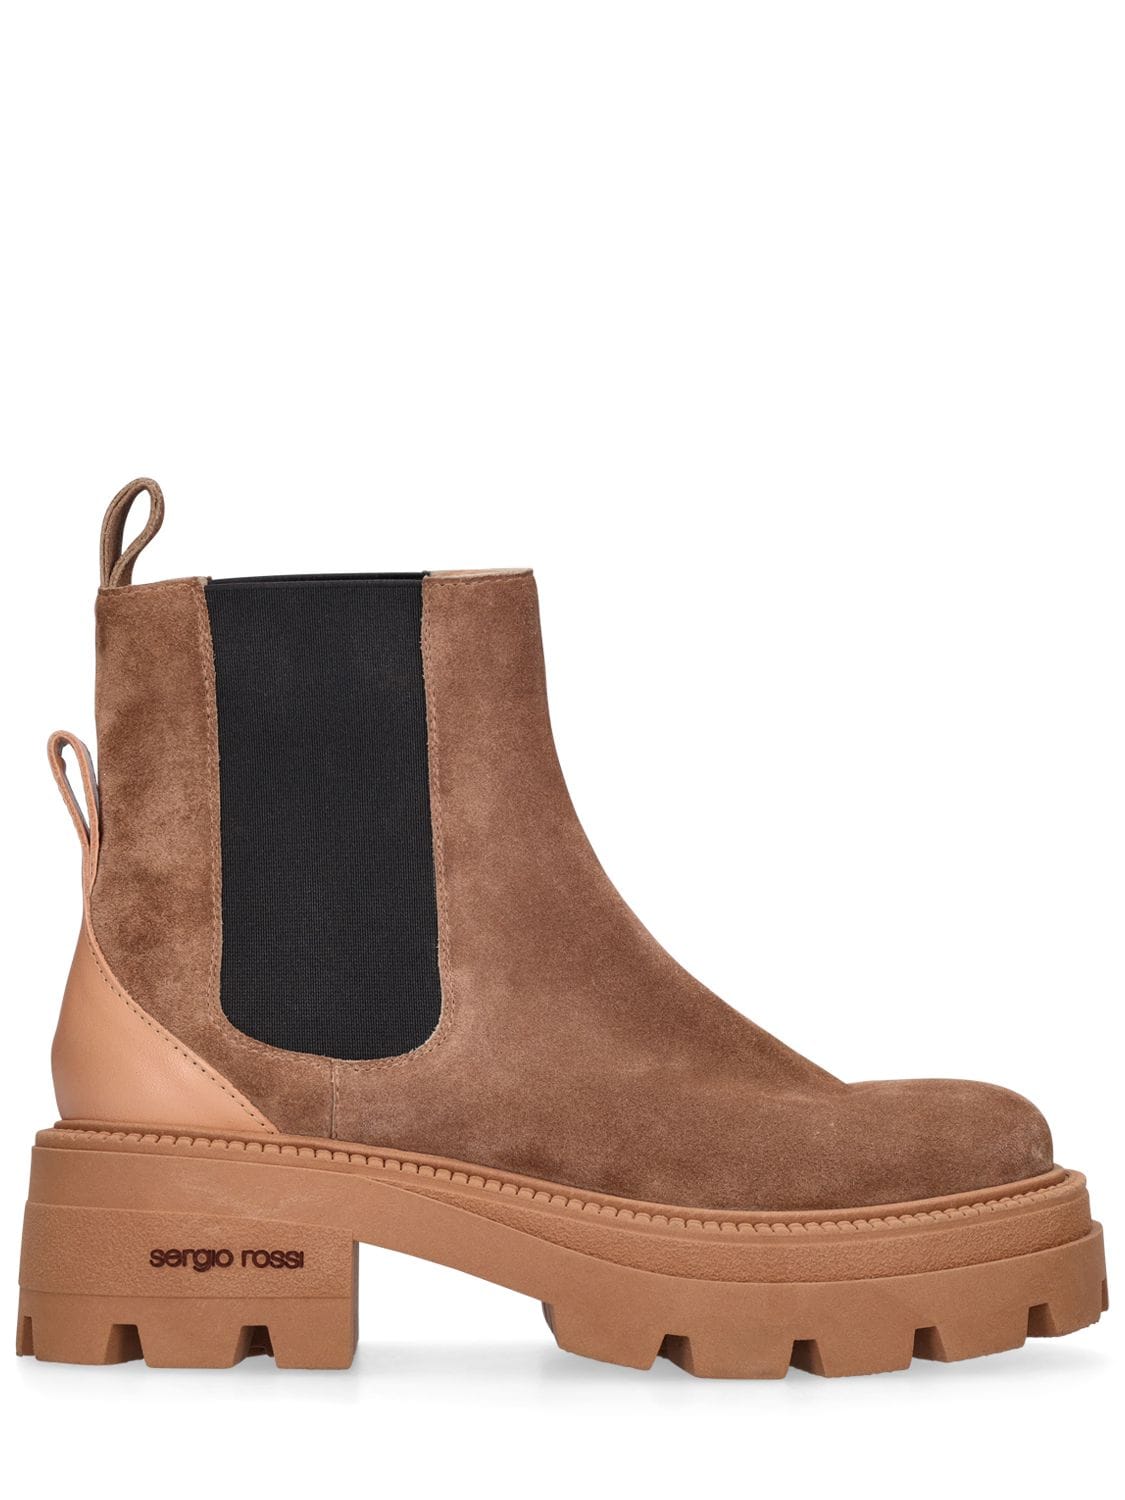 Sergio Rossi 25mm Milla Suede Ankle Boots In Light Brown